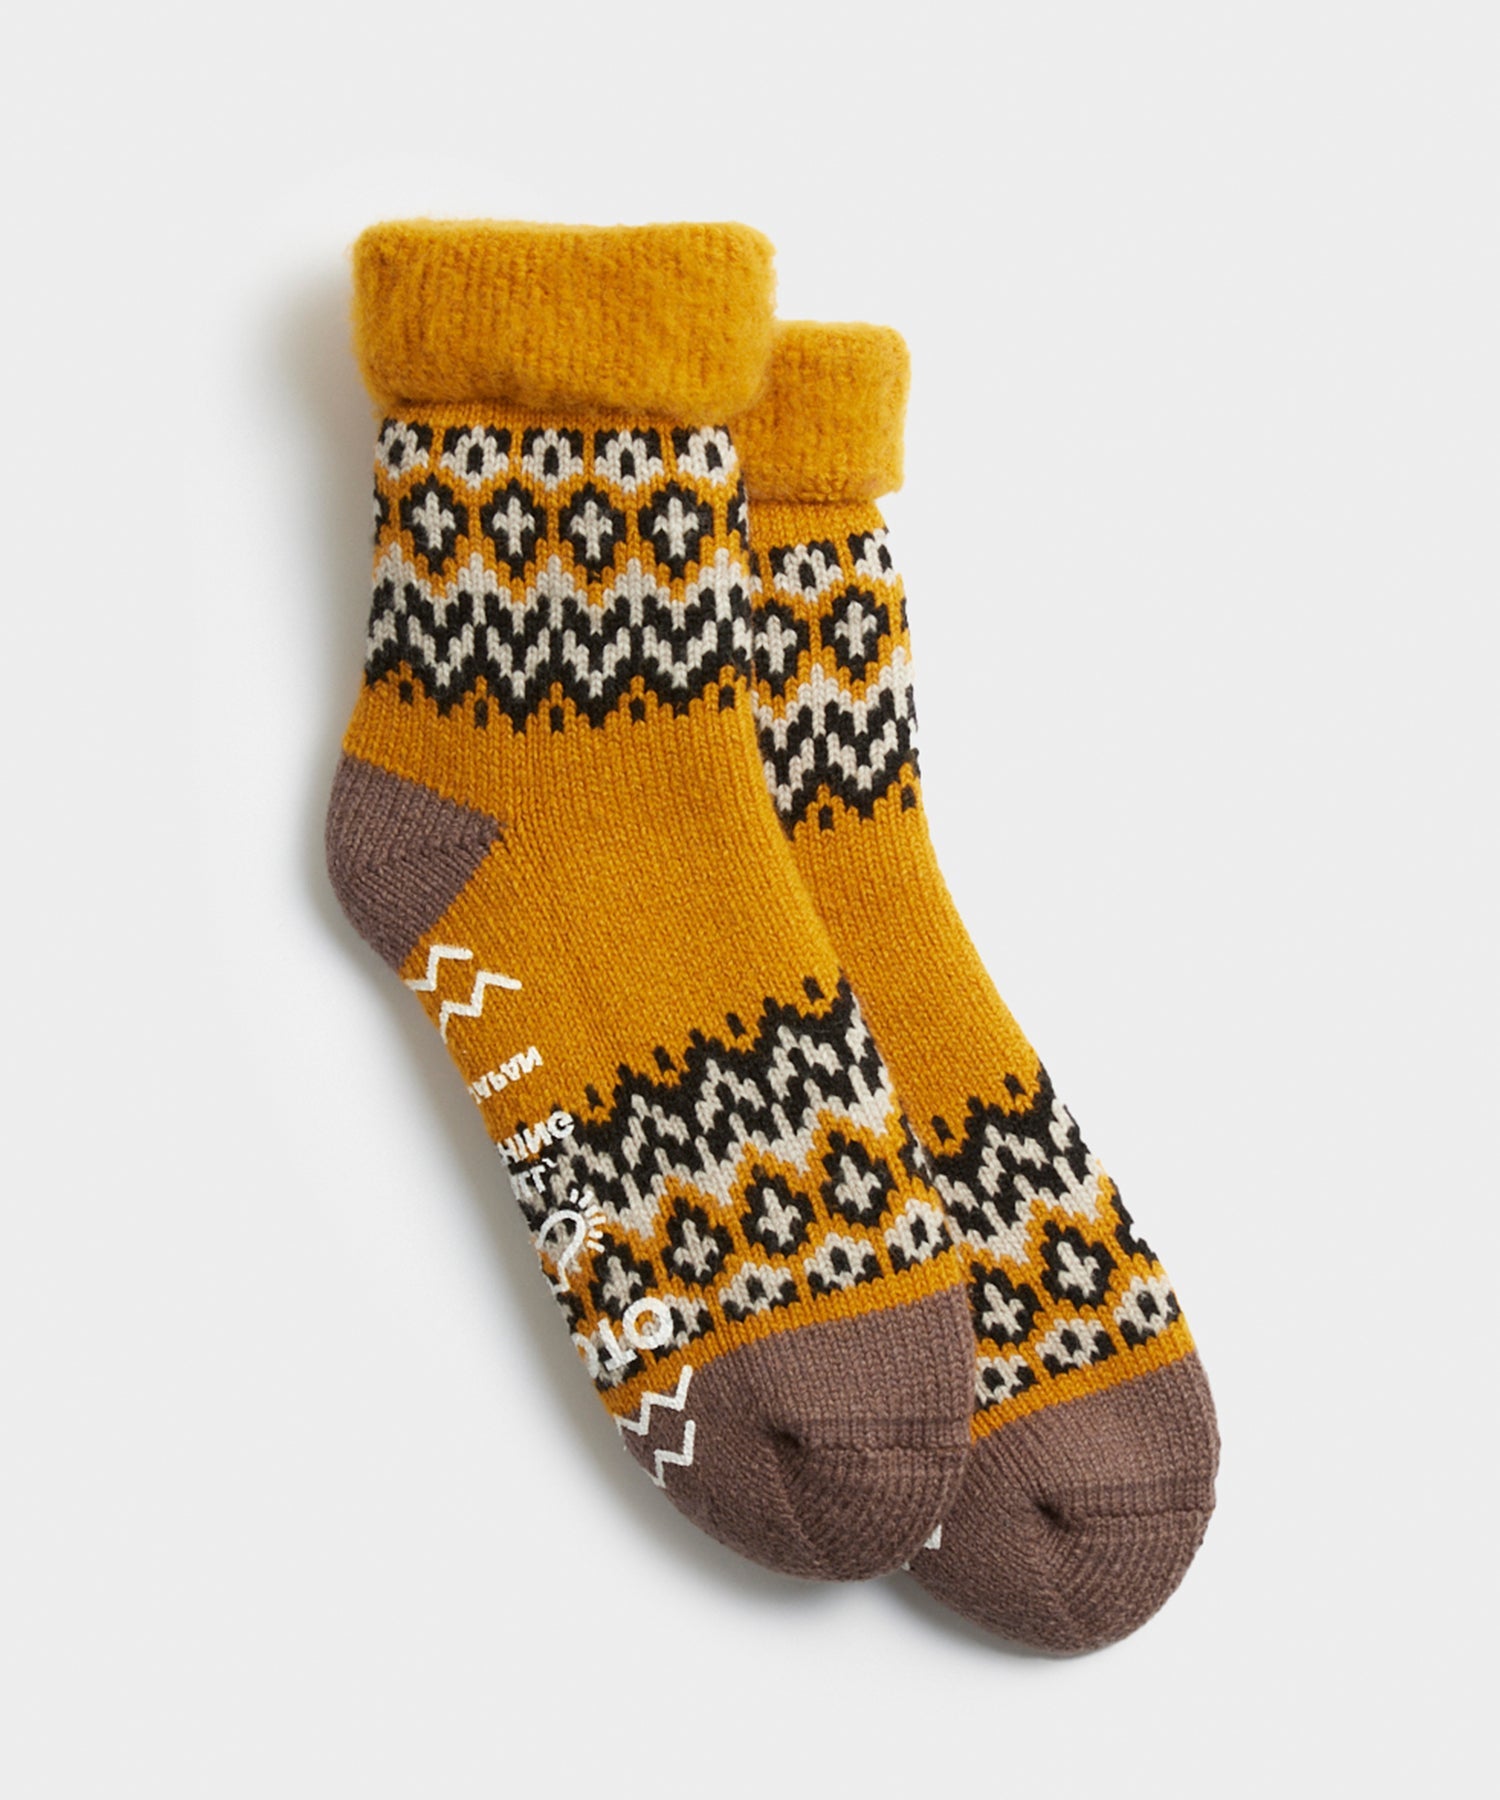 Rototo Comfy Room Nordic Socks in Yellow